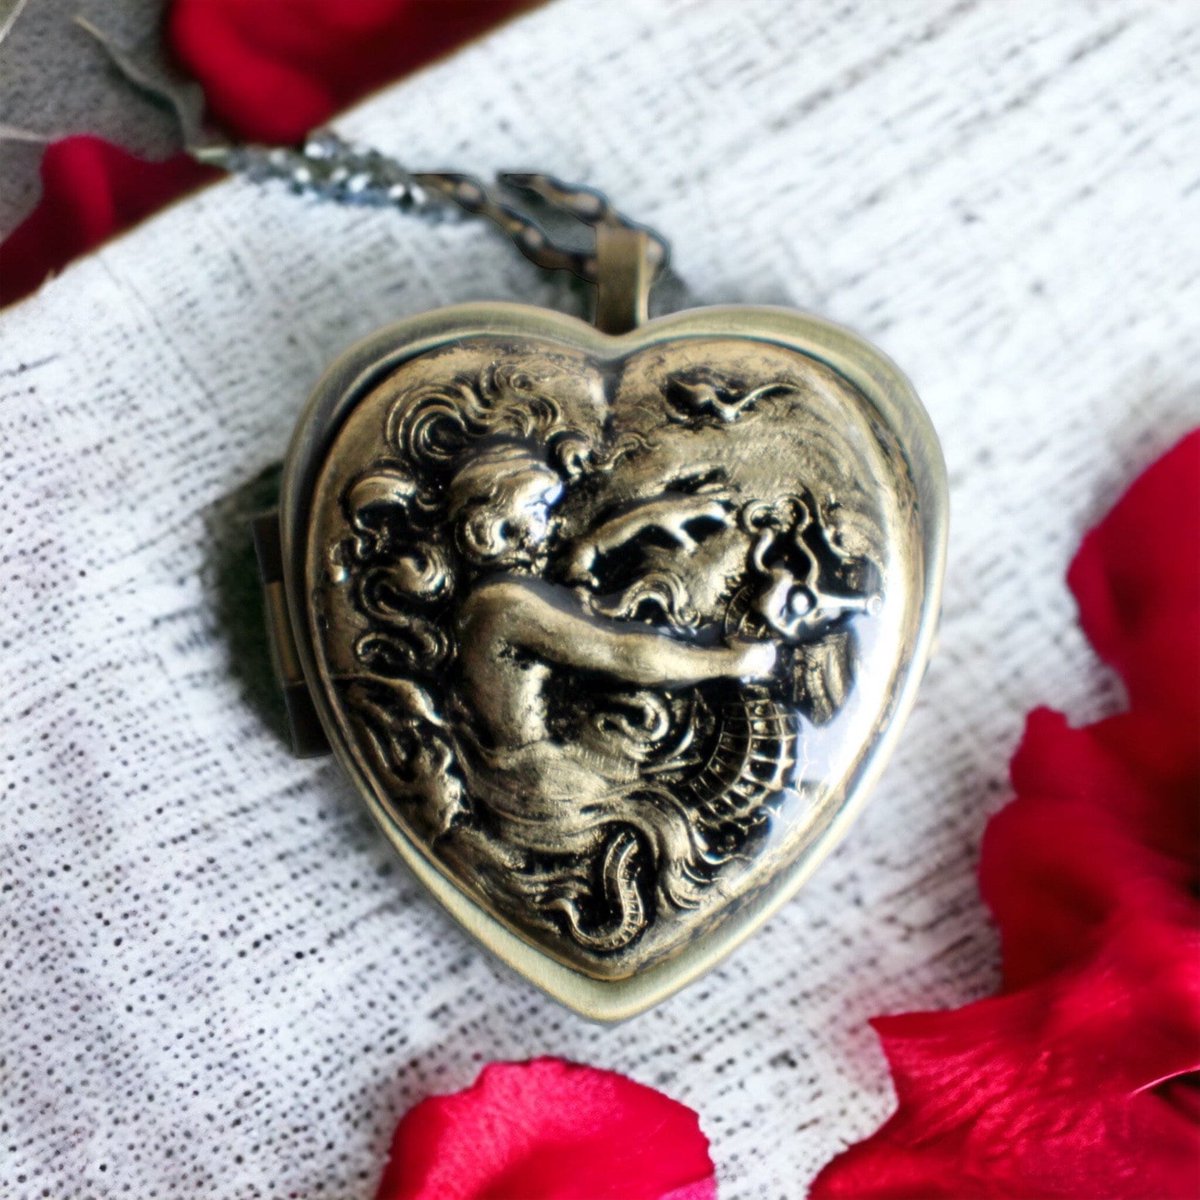 Music box locket, heart shaped locket with music box inside, in bronze with a mermaid and seahorse. tuppu.net/bbc457a7 #Etsy #Charsfavoritethings #MusicalPendant